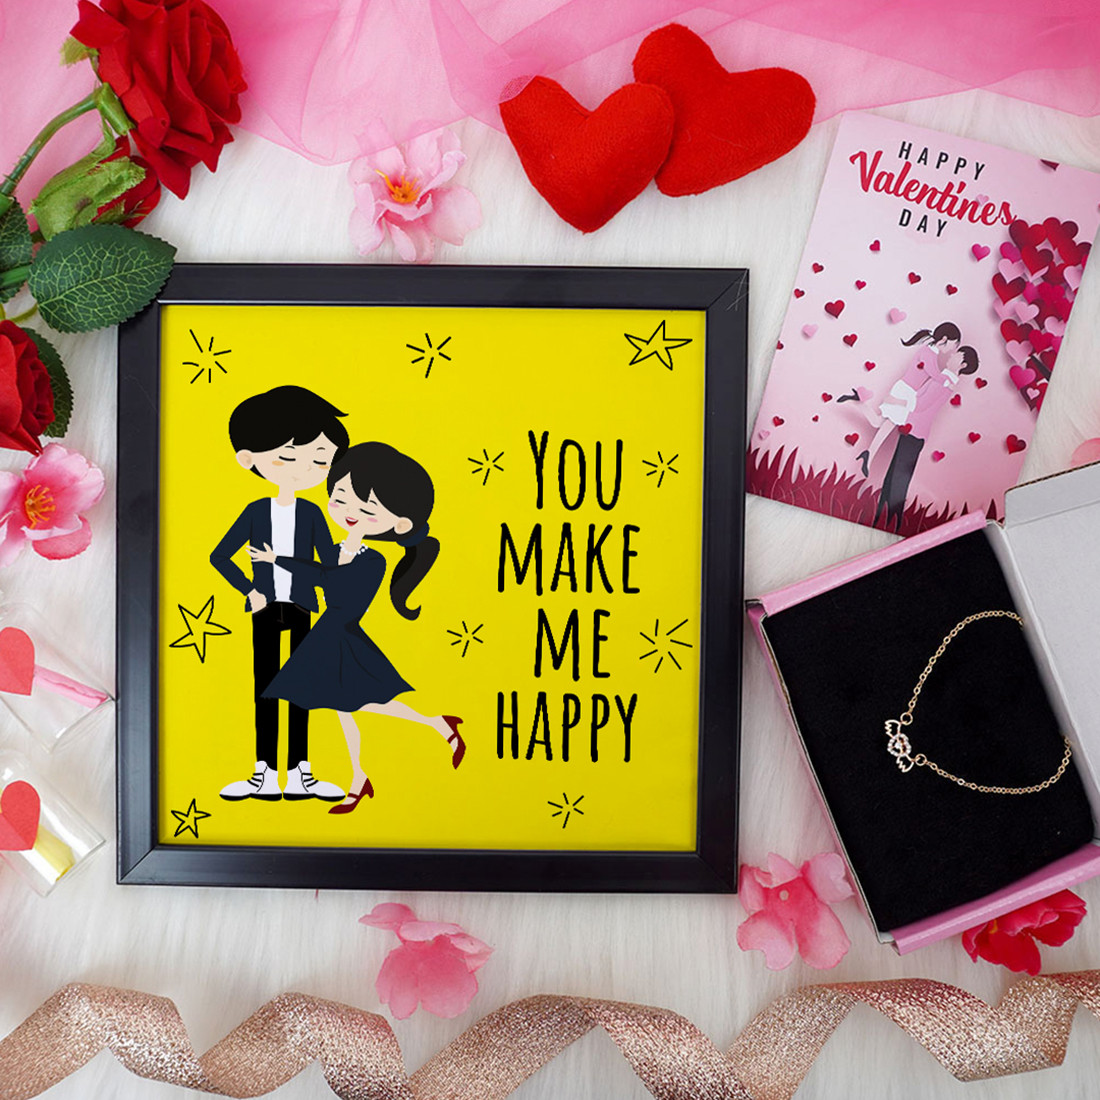 You Make Me Happy Valentine Gift Set | Valentine's Day Gifts for Girlfriend | Valentine Gift for Wife | Women's Pendant/Pendant for Girl/Greeting Card | Photo Frame (8x8 Inches)